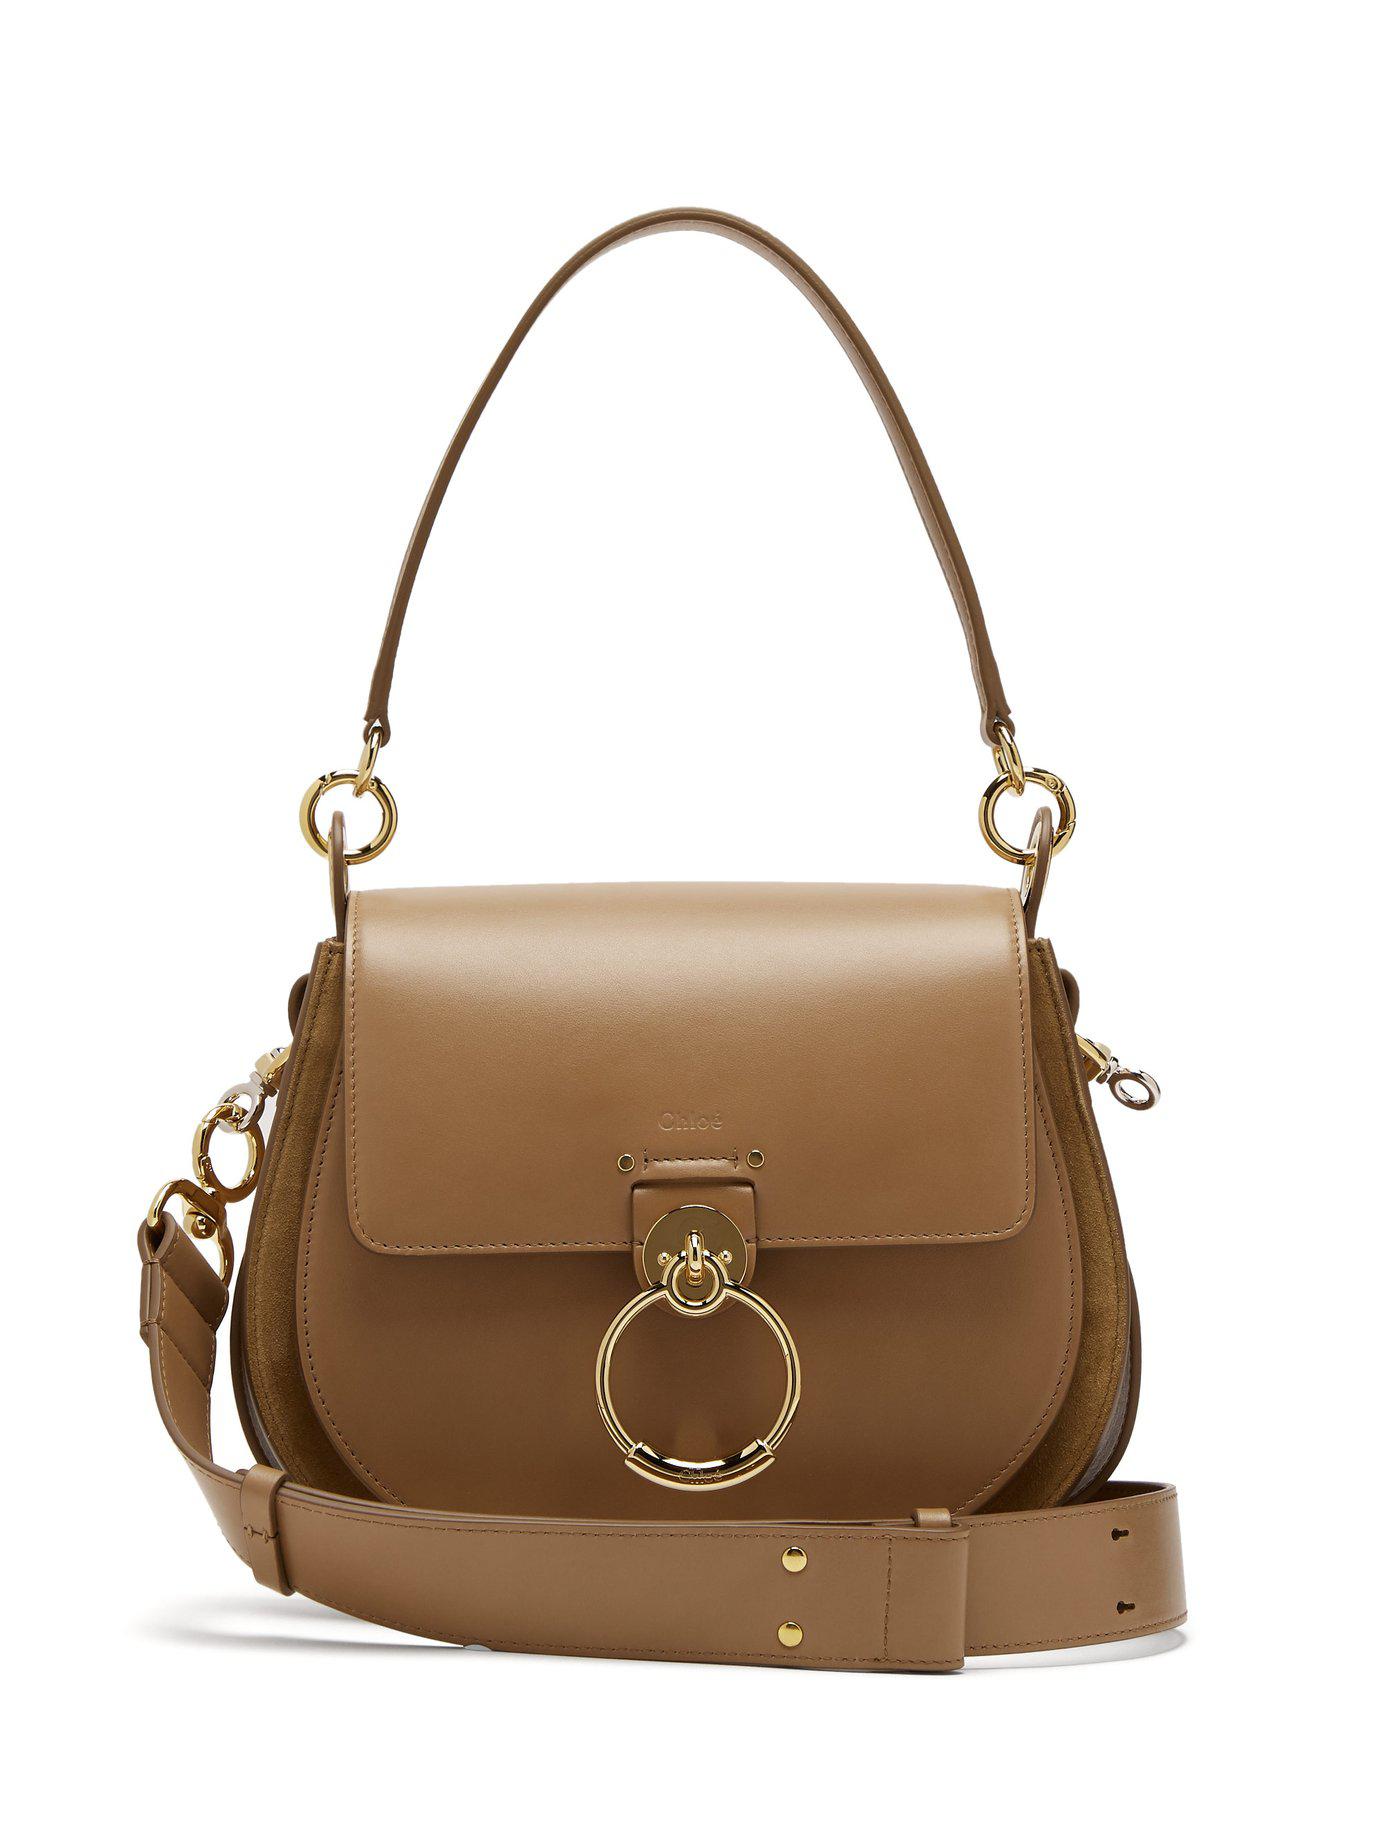 Chloé Tess Medium Leather And Suede Cross-Body Bag In Brown | Lyst